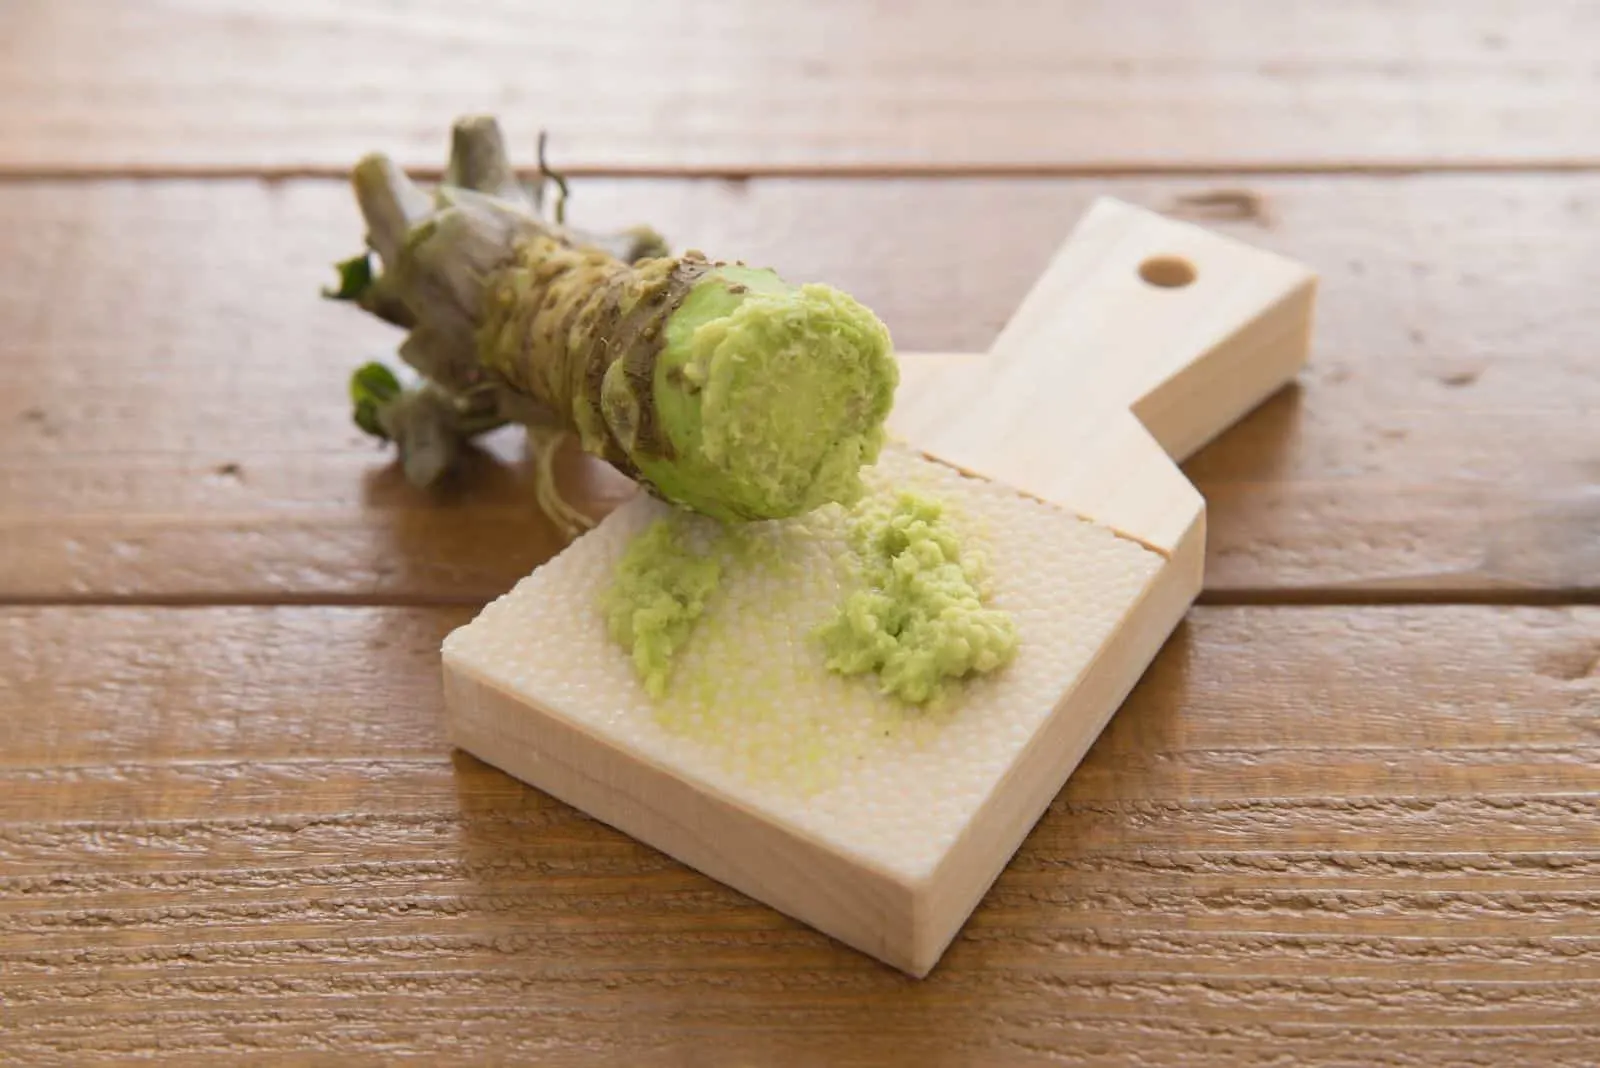 japanese spice wasabi grated on the board